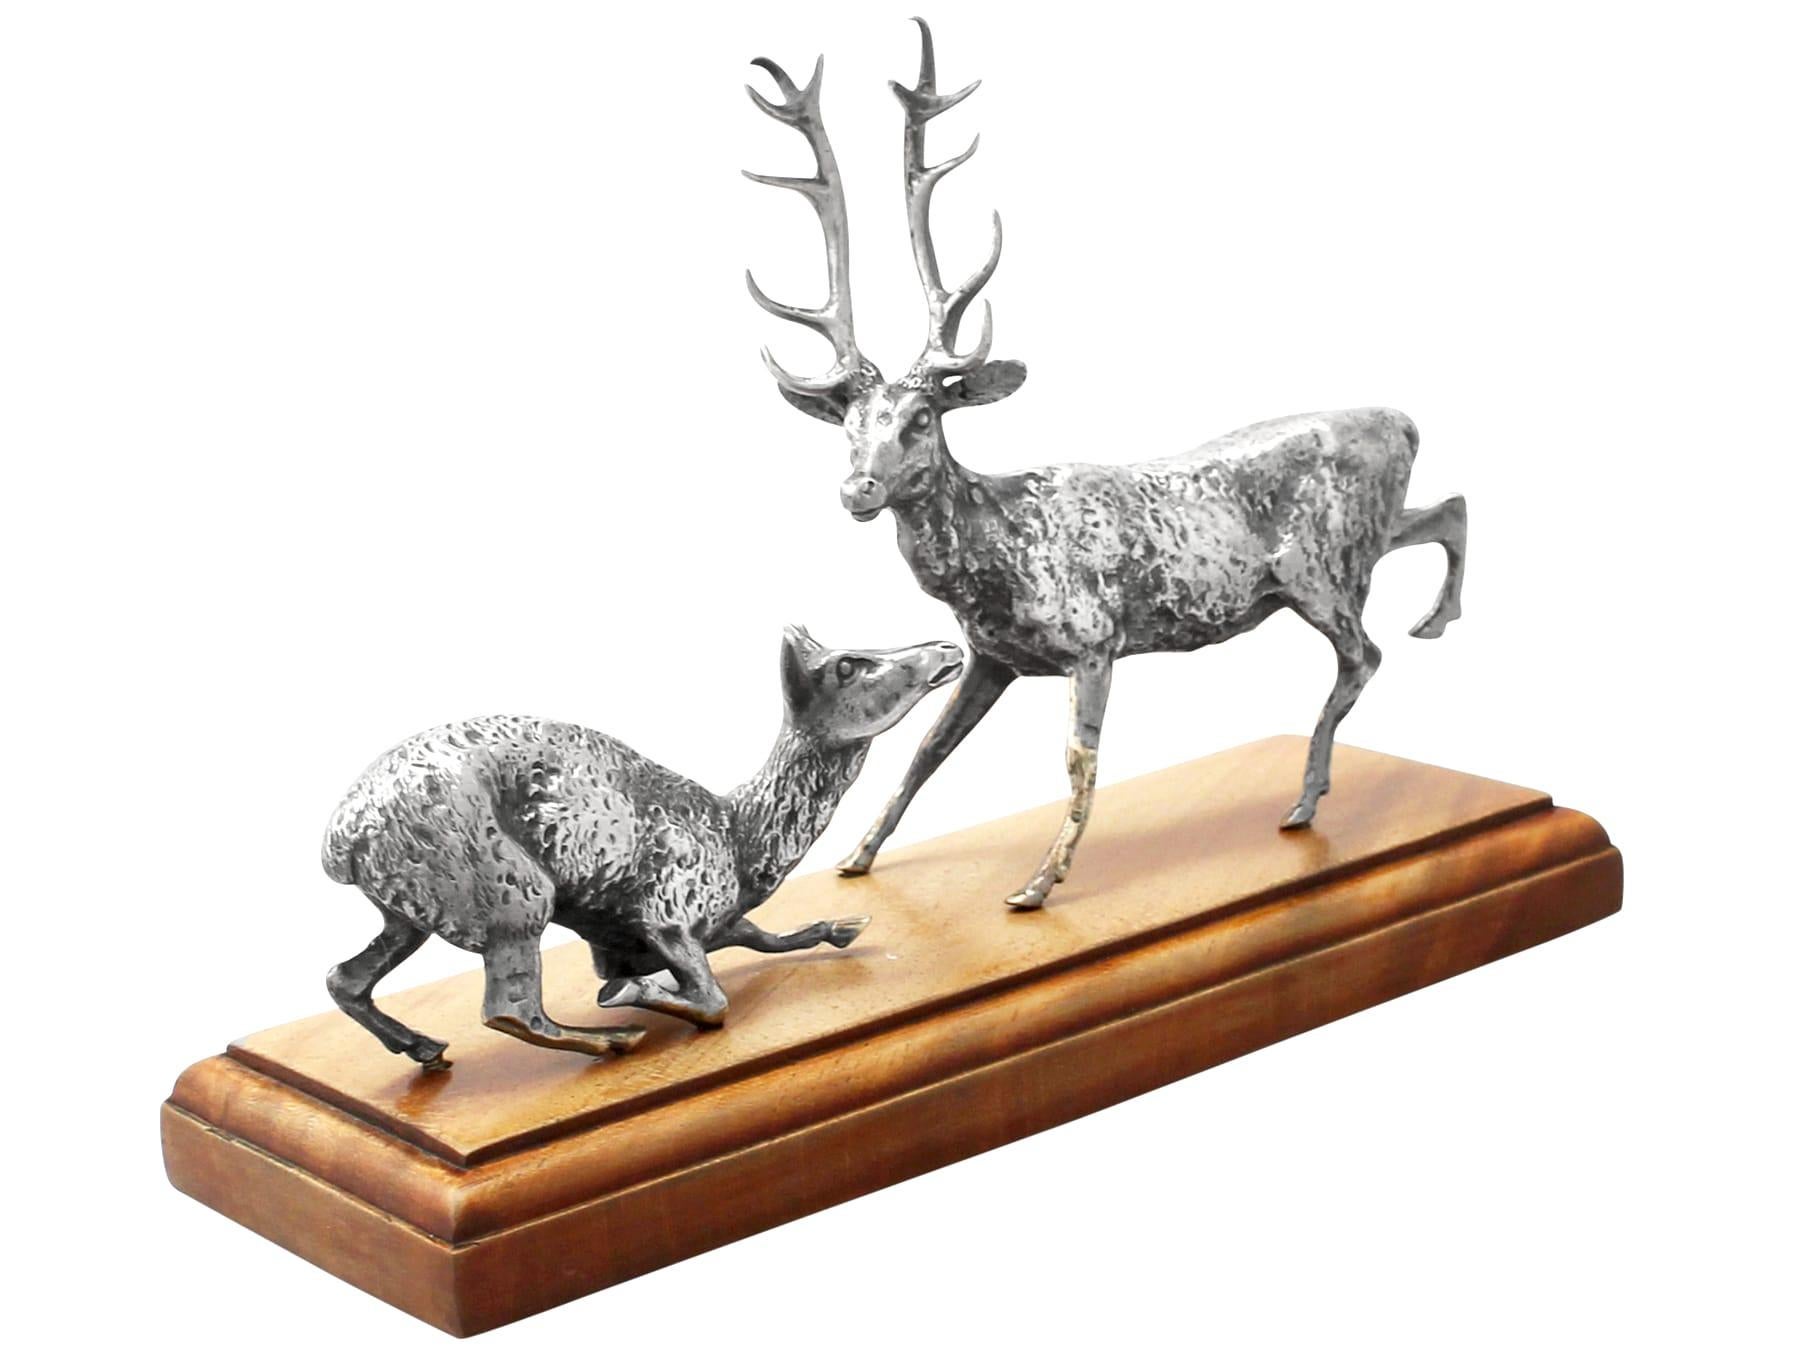 A fine and impressive antique pair of Victorian English cast sterling silver deer and stag models on a plinth; an addition to our animal related silverware collection.

These fine antique Victorian cast sterling silver table ornament is